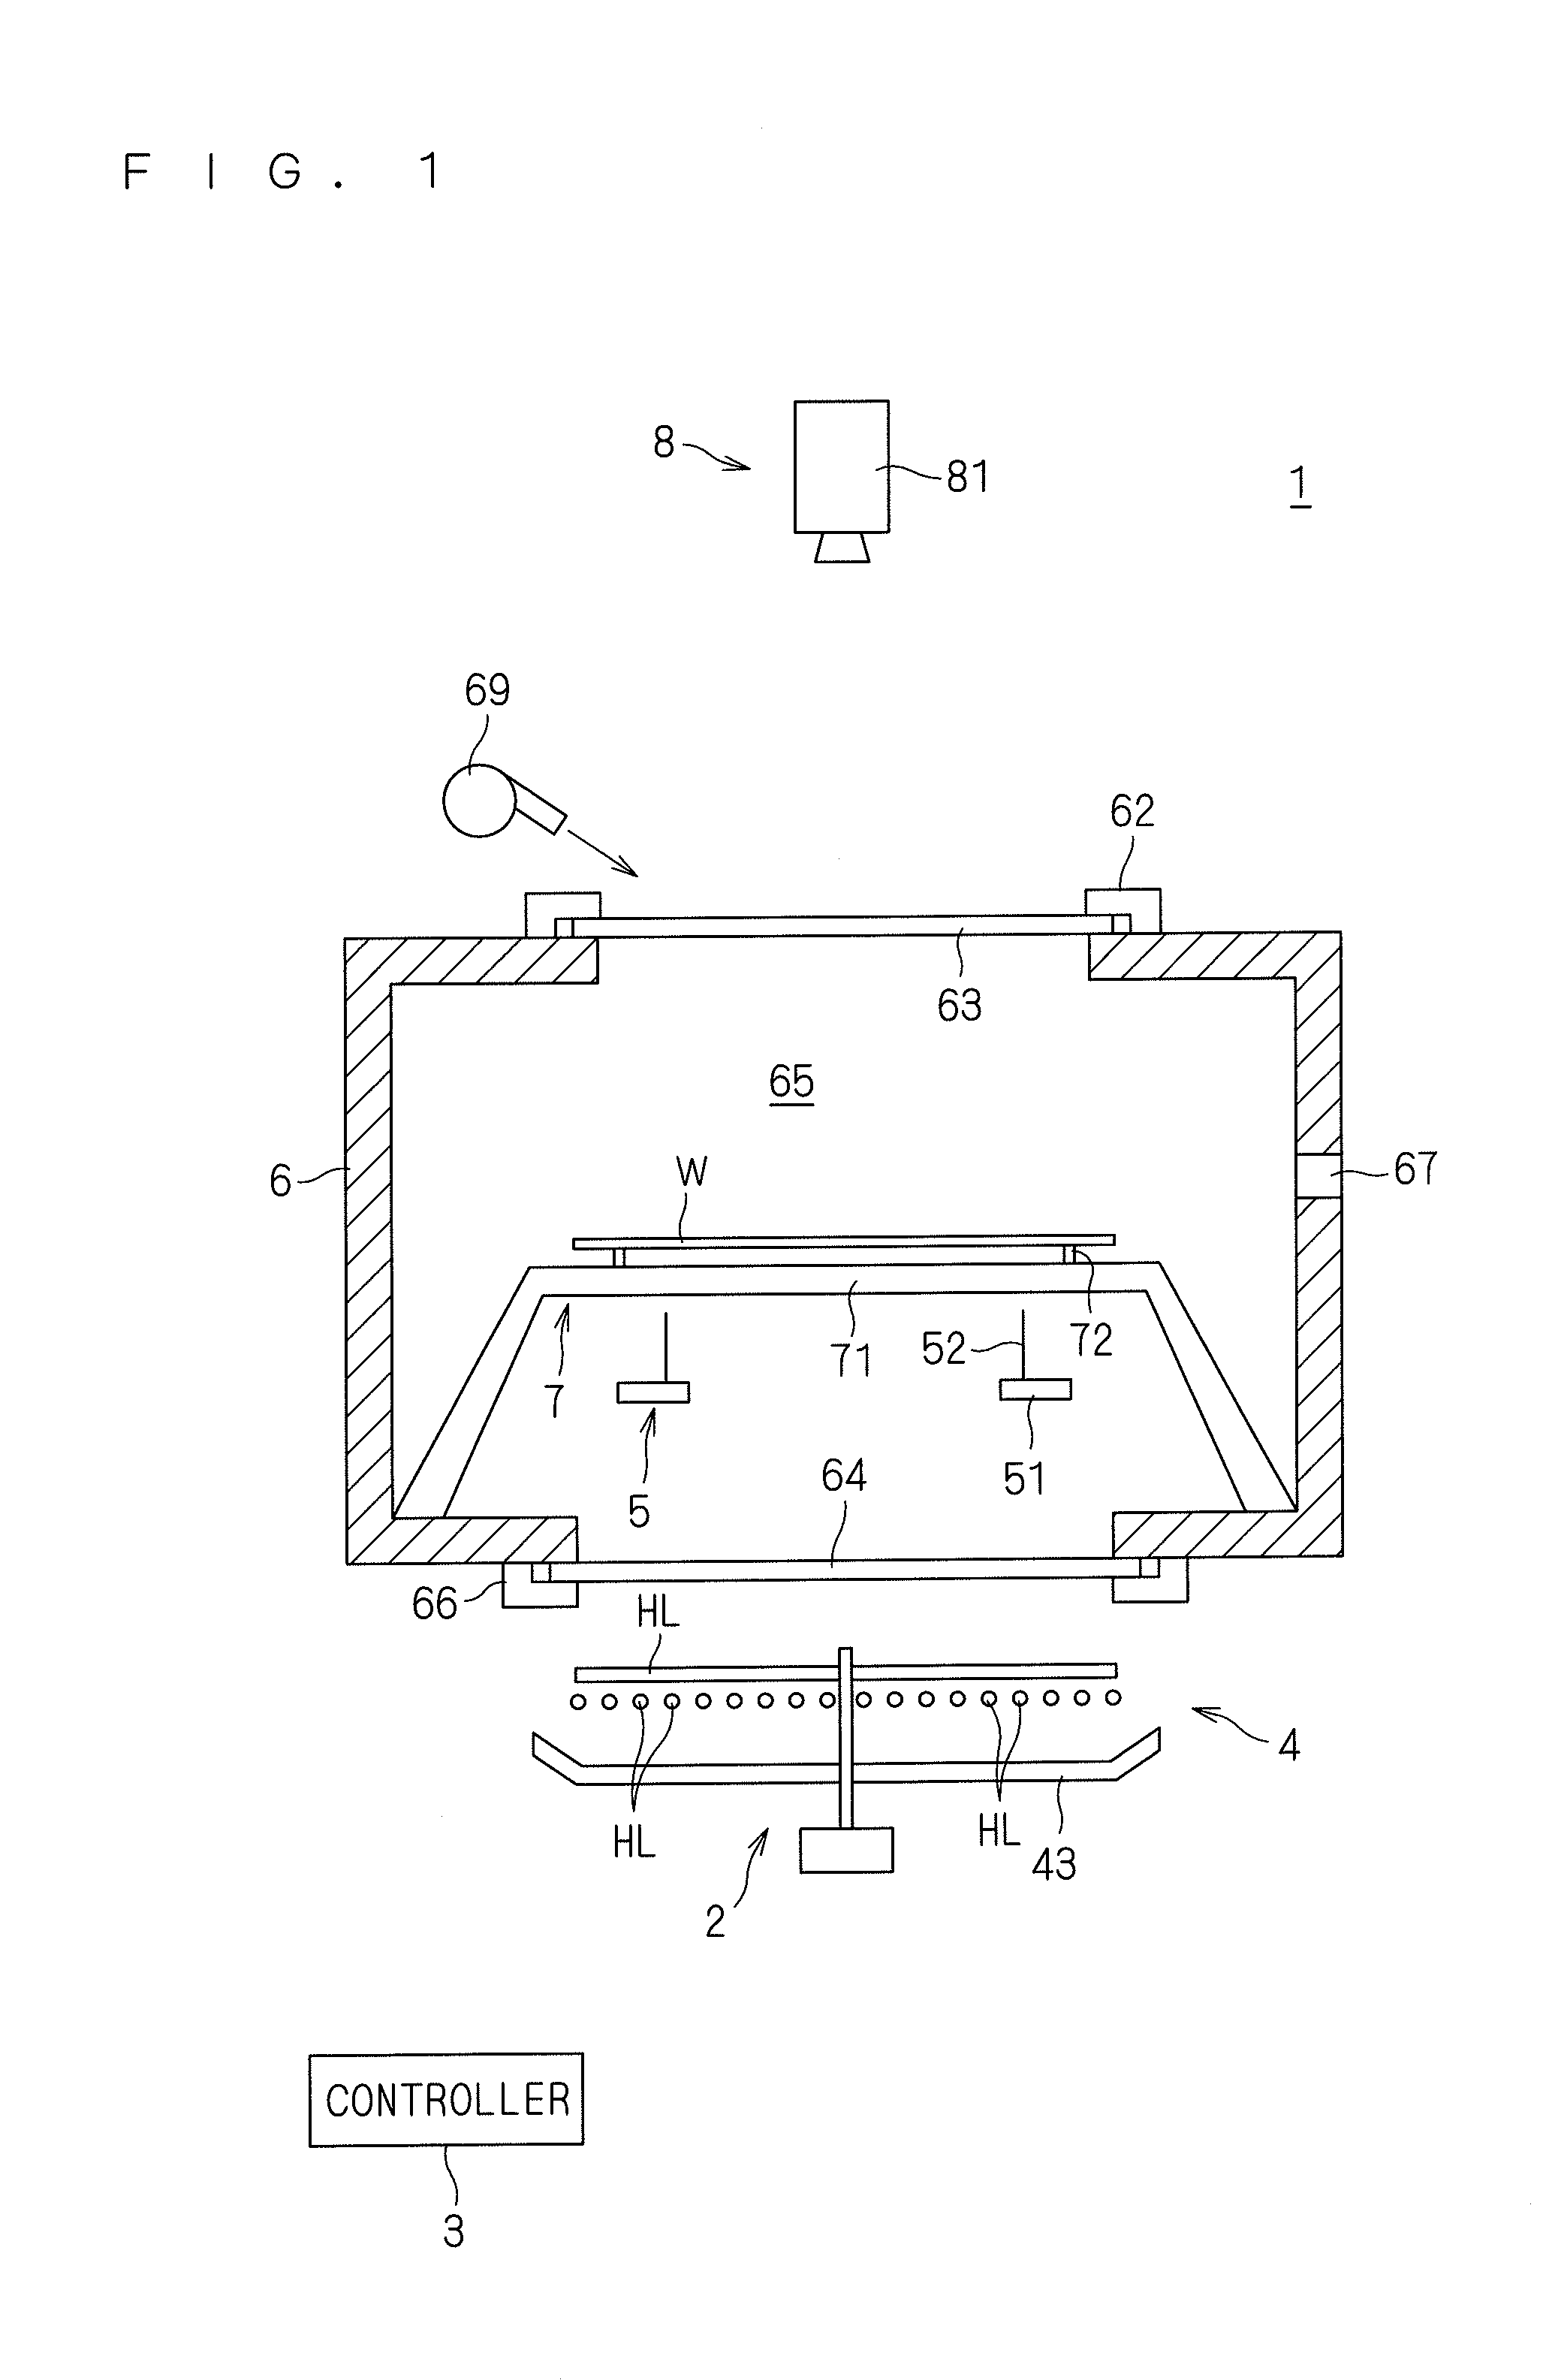 Heat treatment apparatus for heating substrate by light irradiation